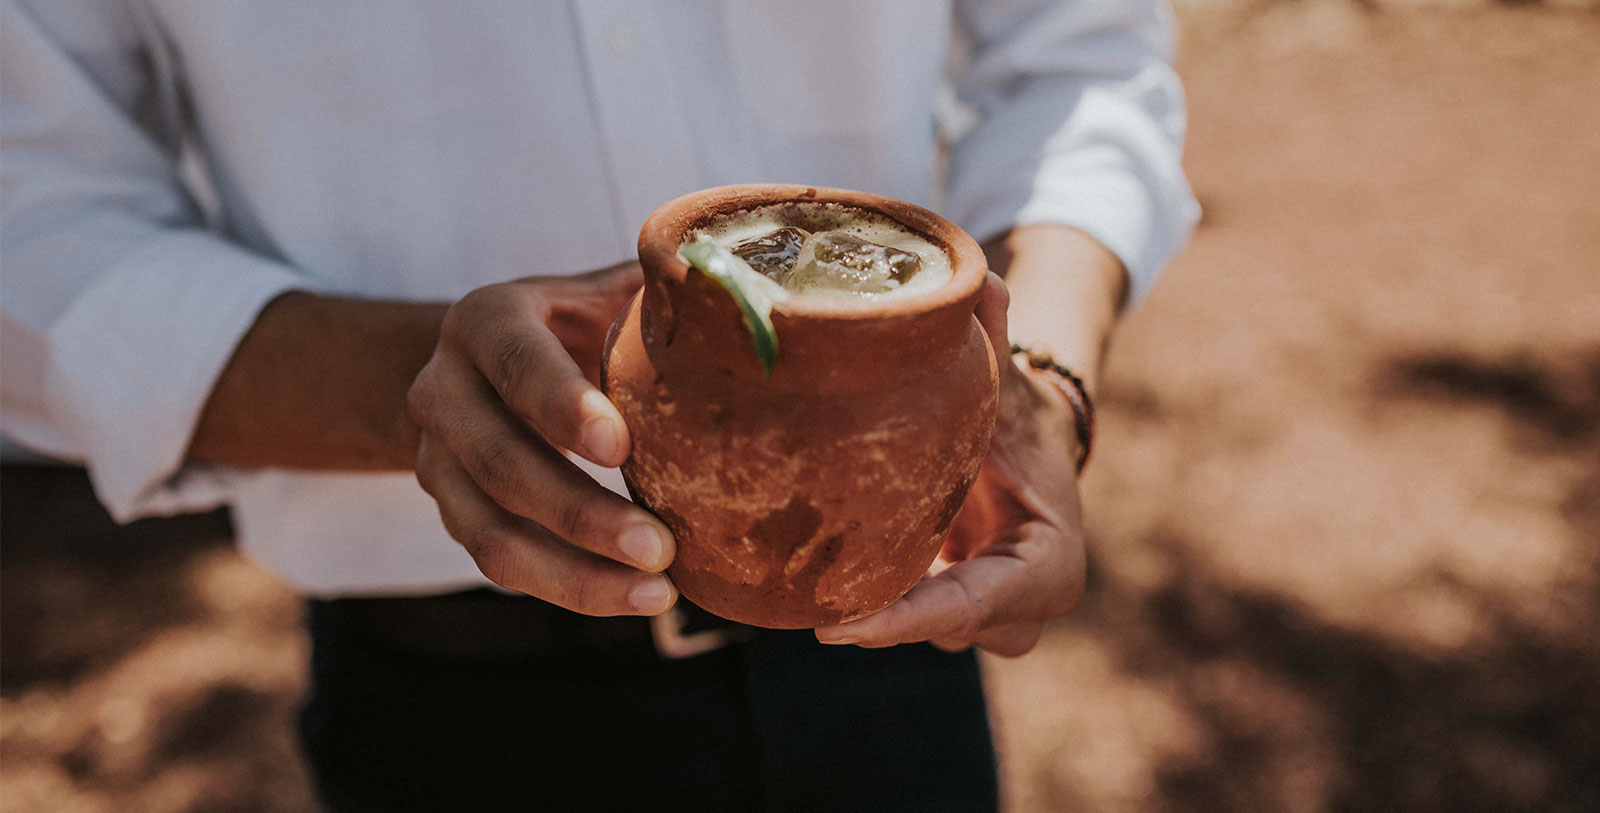 Taste the traditional Jalisco dish torta ahogada with a side of authentic tequila.